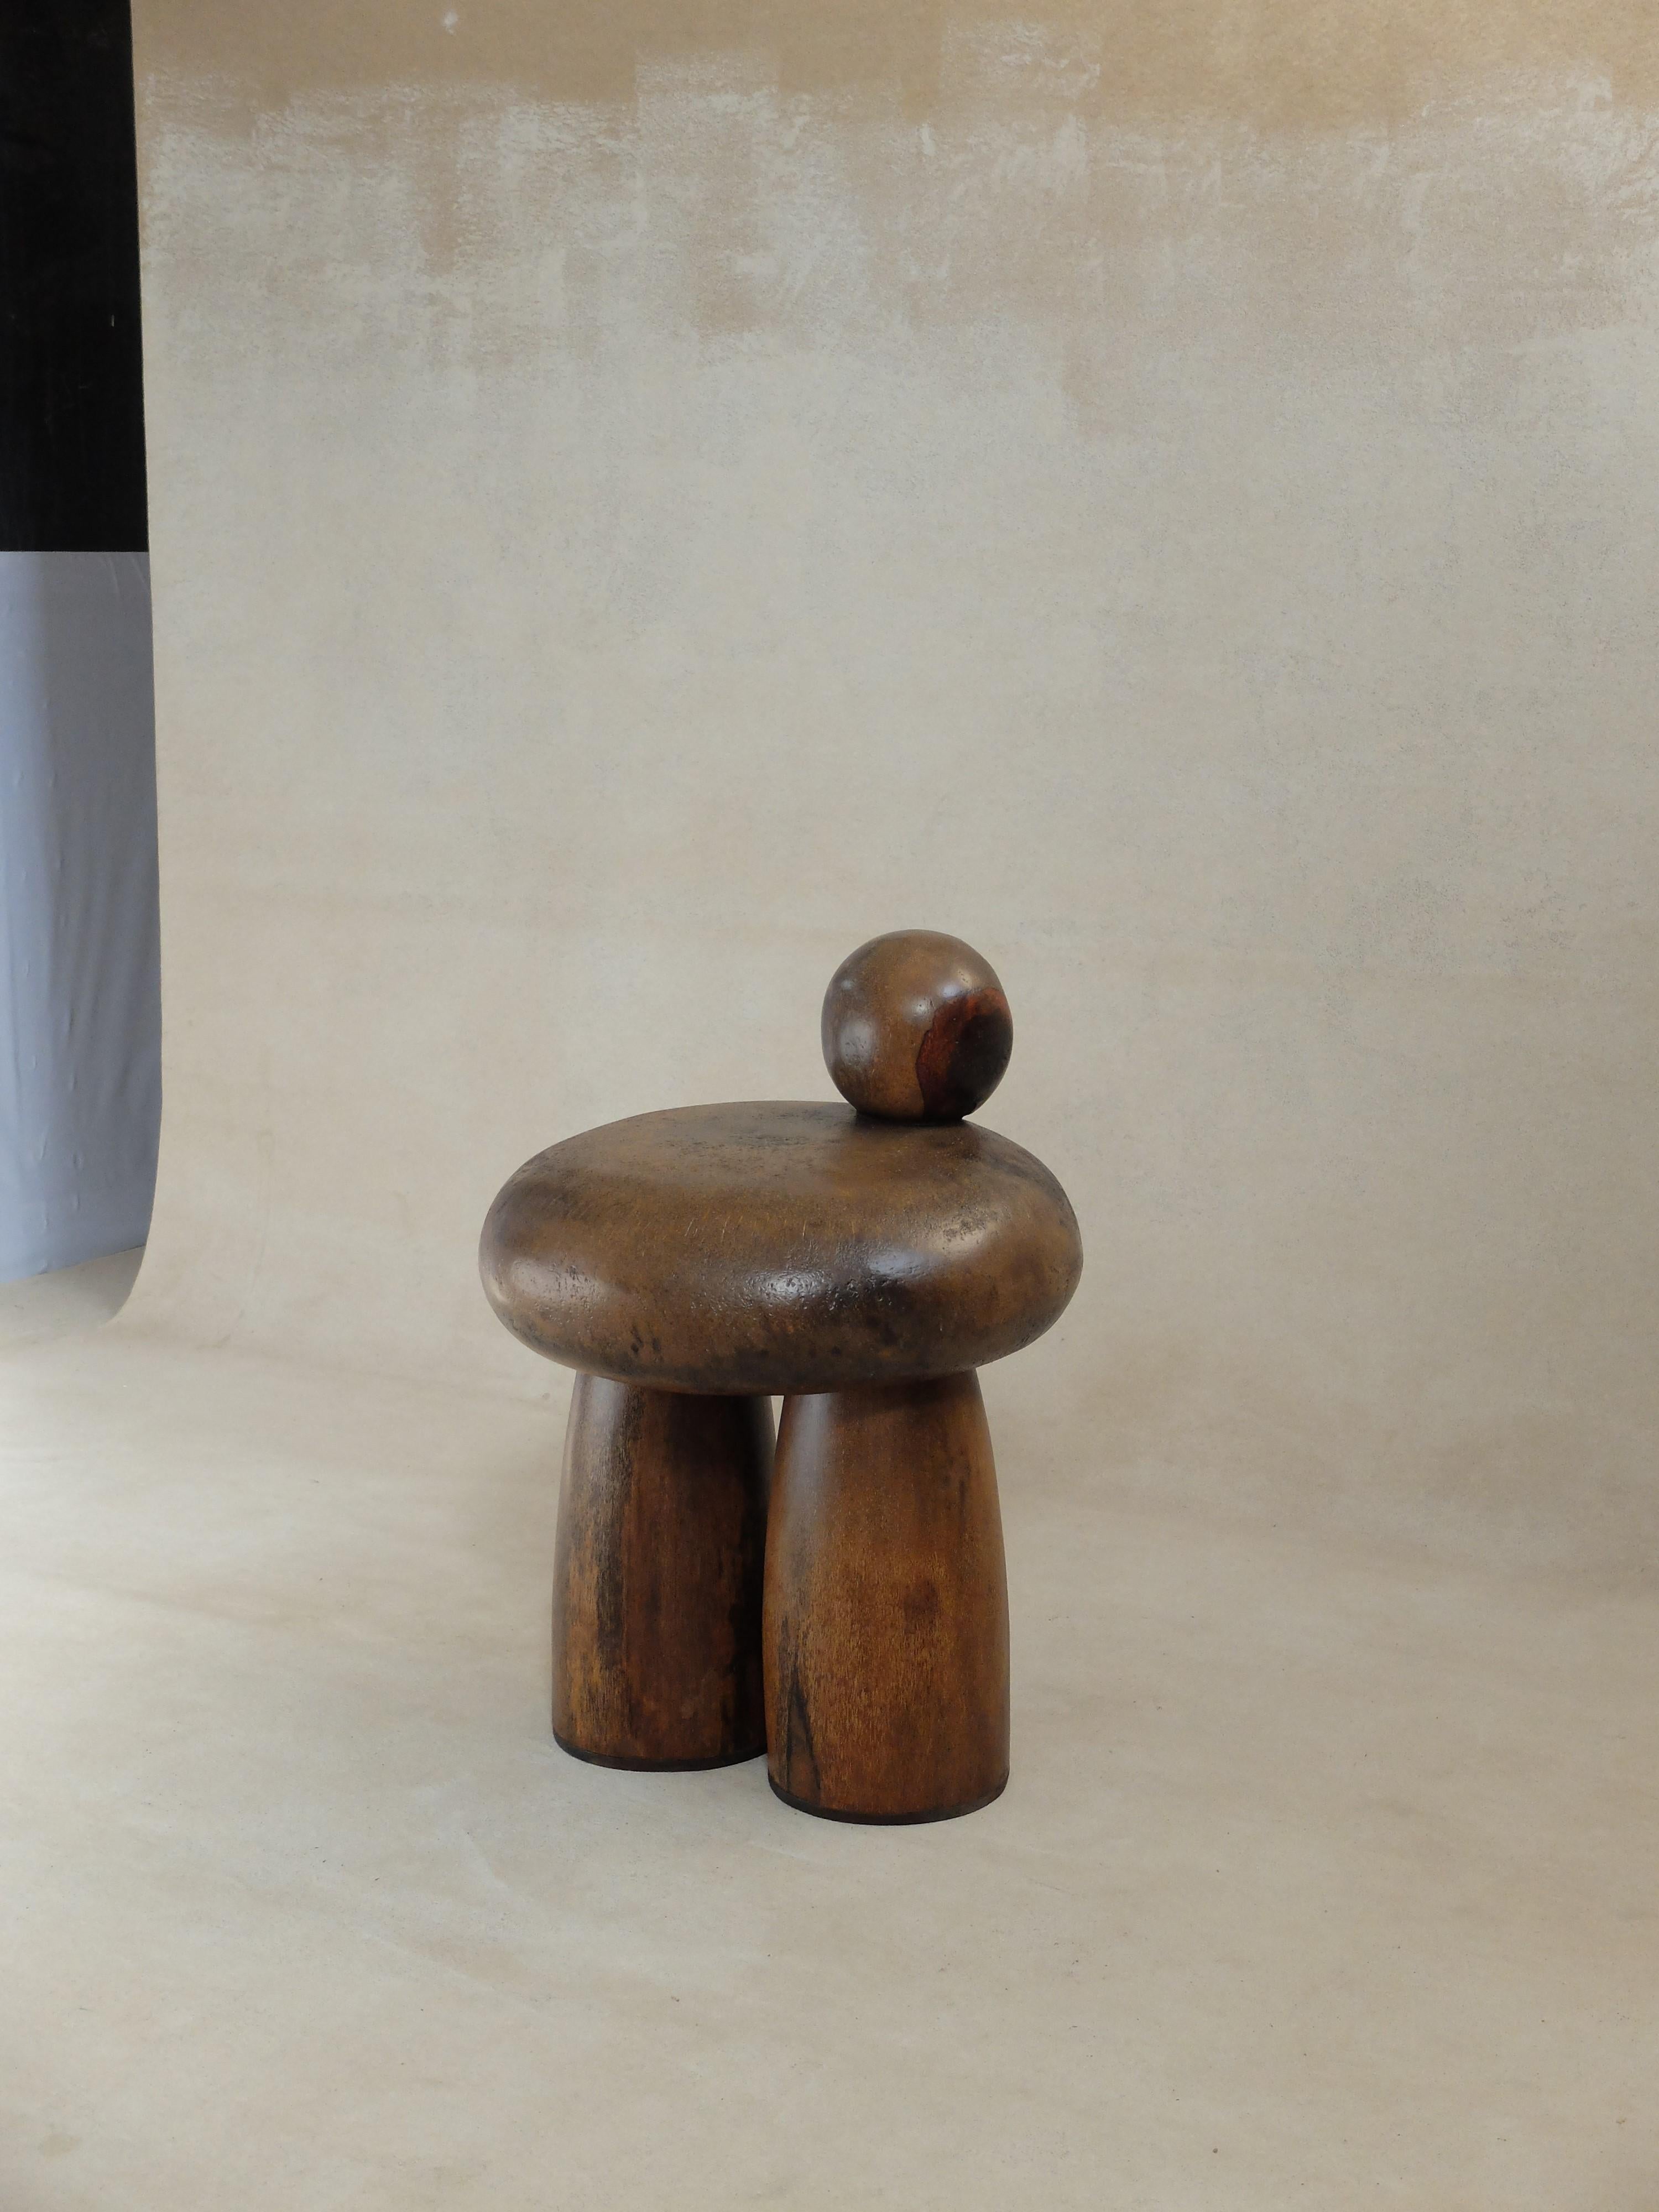 Petite Ourse Wood Seat by Altin
Designed and developed by Yasmine Sfar and Mehdi Kebaier.
Dimensions: D 50 x H 68 cm
Materials: Palm wood.

Hand-carved palm wood seat.

Orbit
A journey to a new dream world that we could call «home».
Original